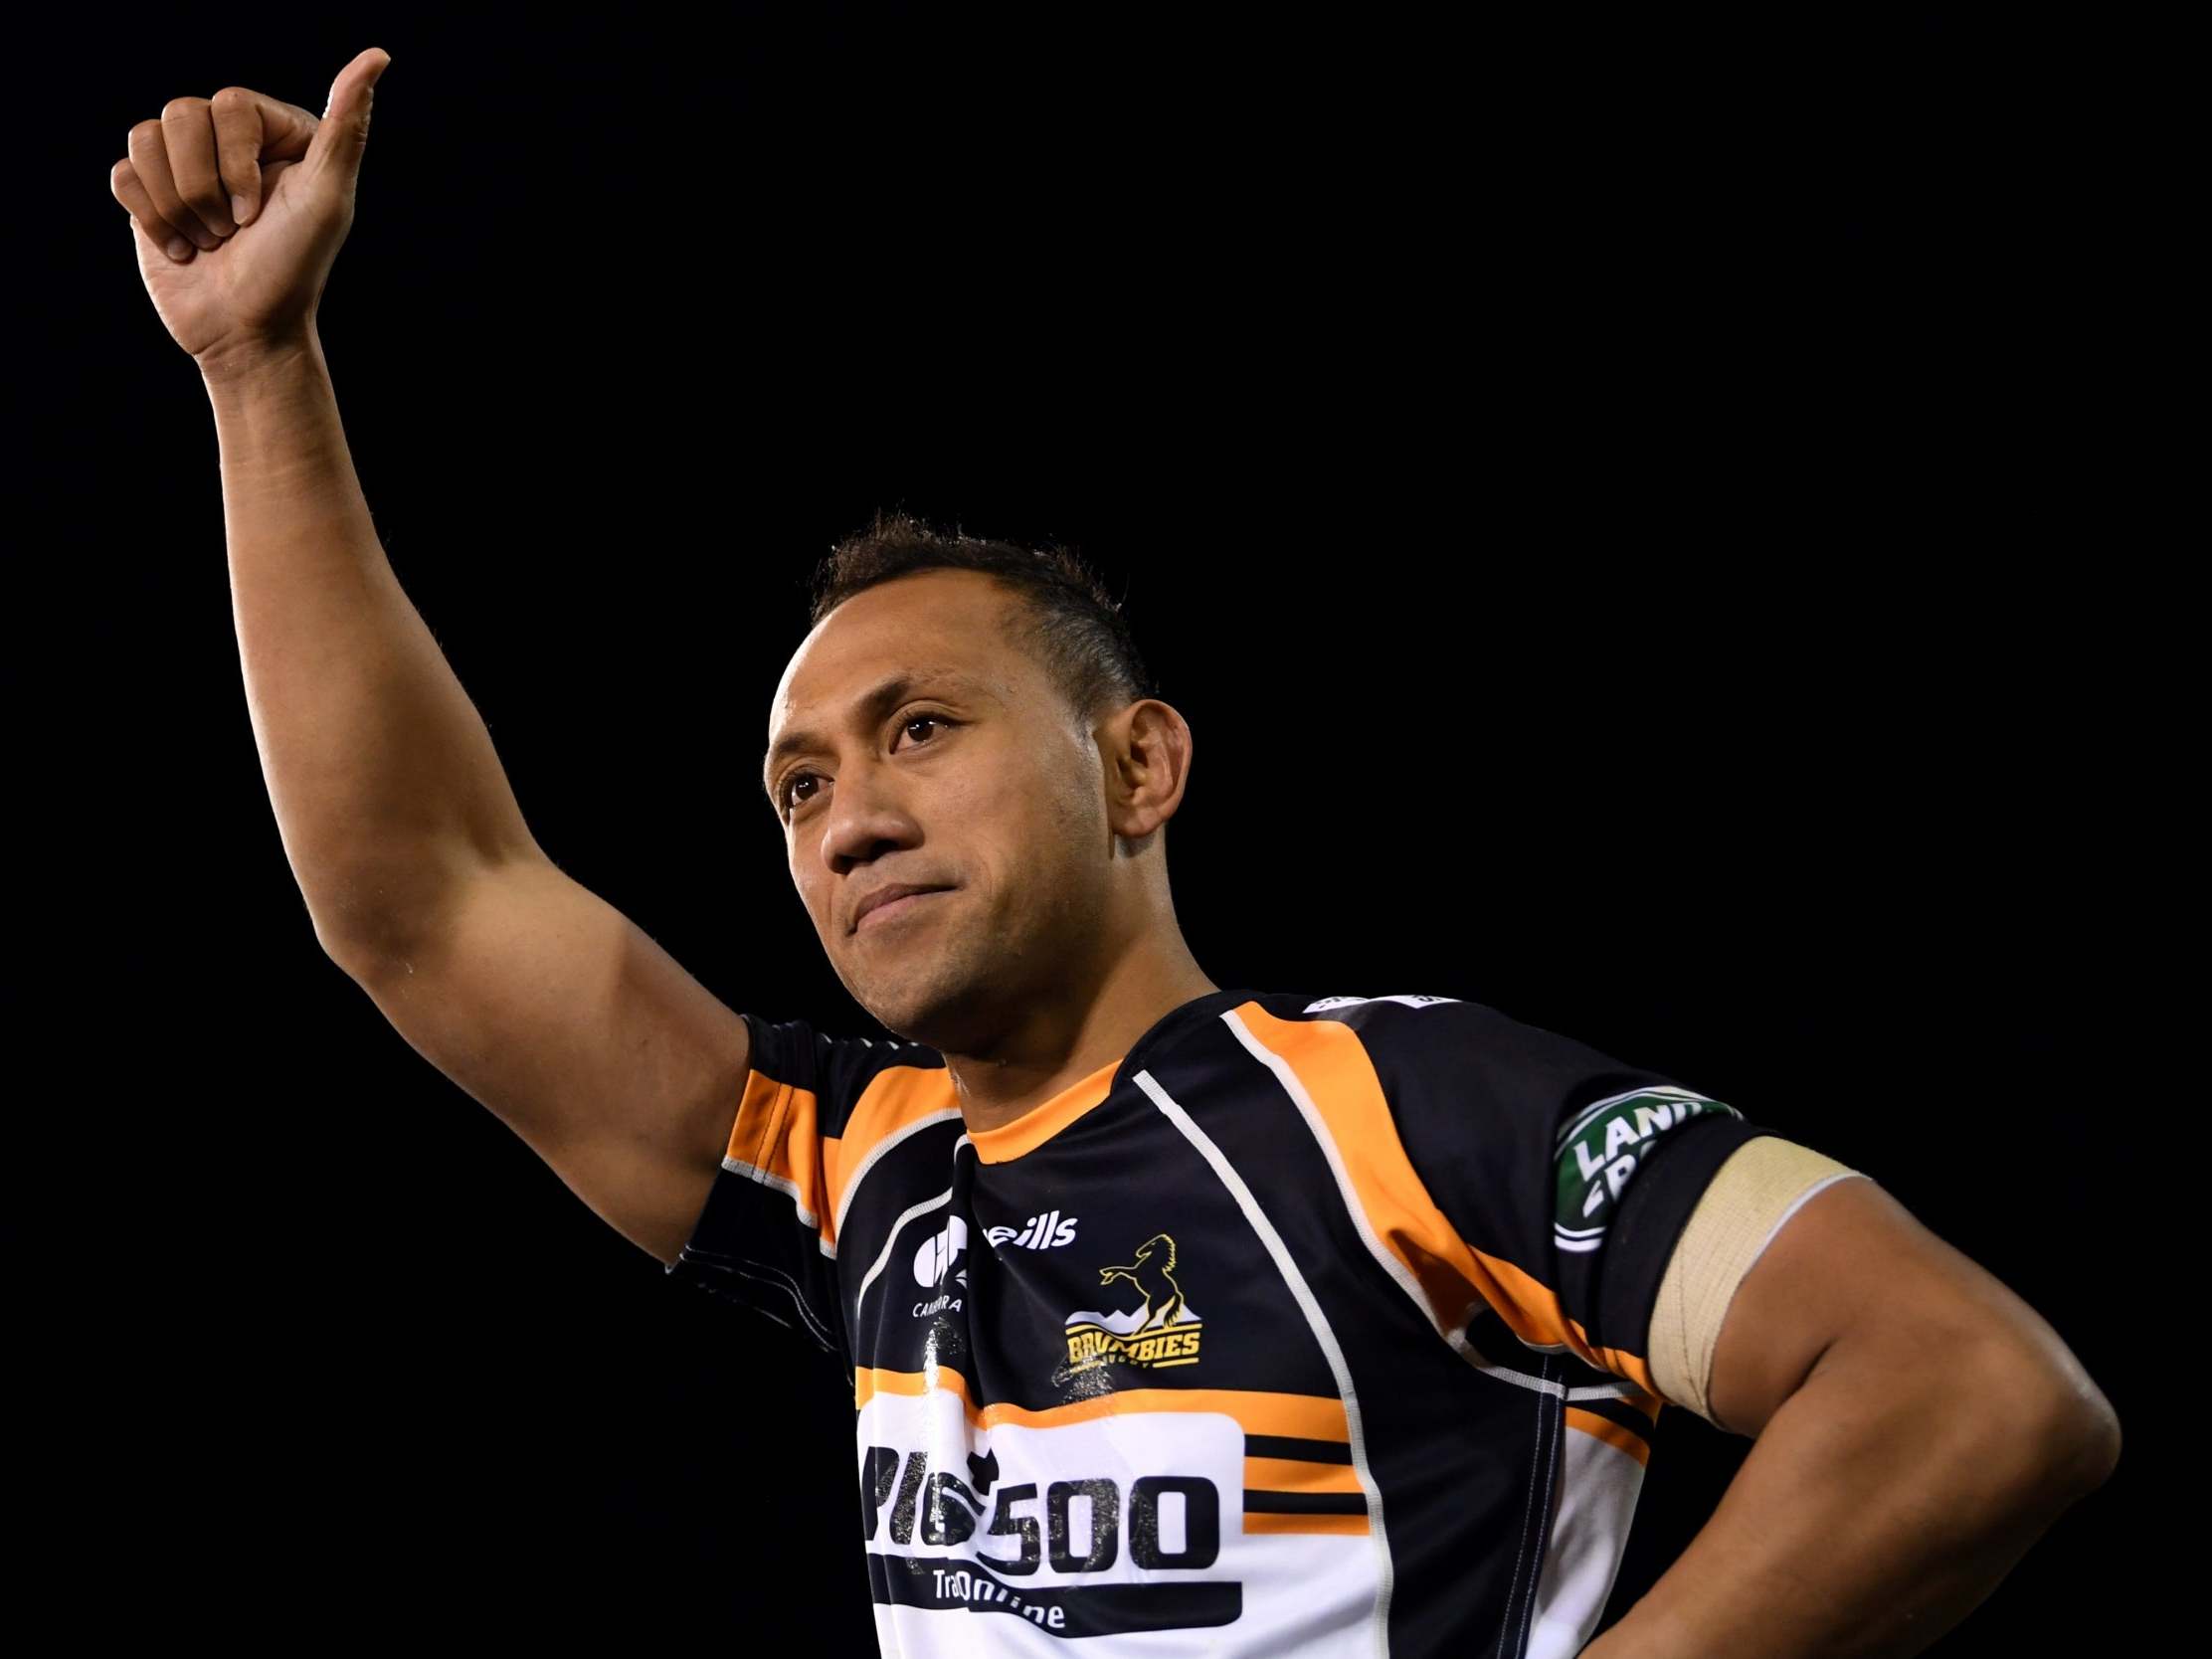 Christian Lealiifano makes his return to the Wallabies squad